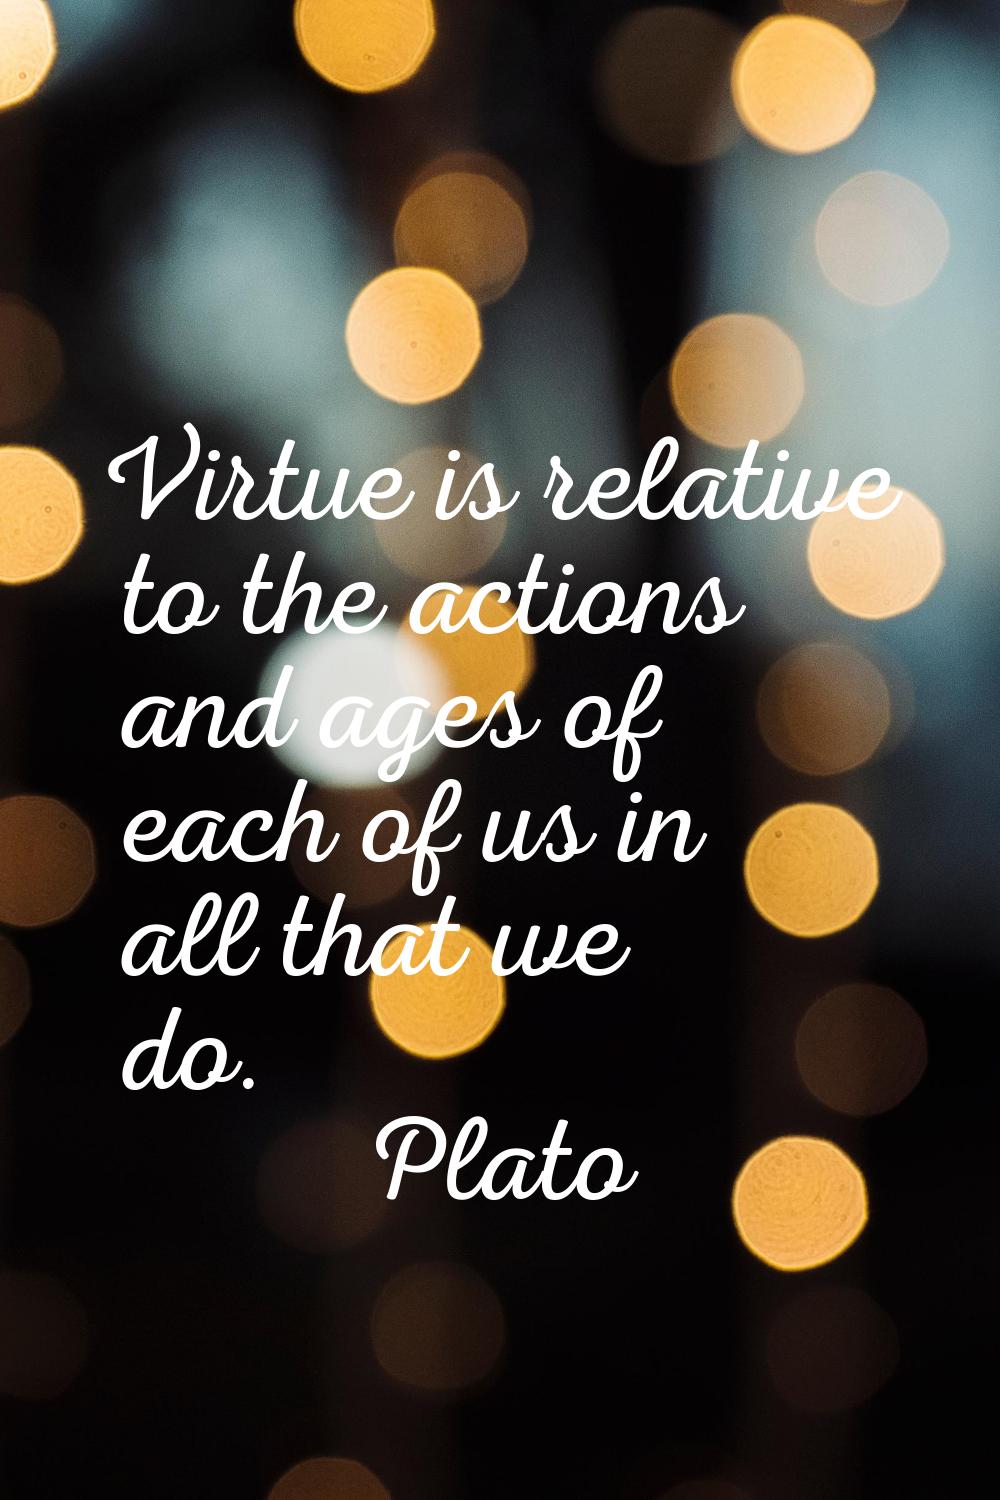 Virtue is relative to the actions and ages of each of us in all that we do.